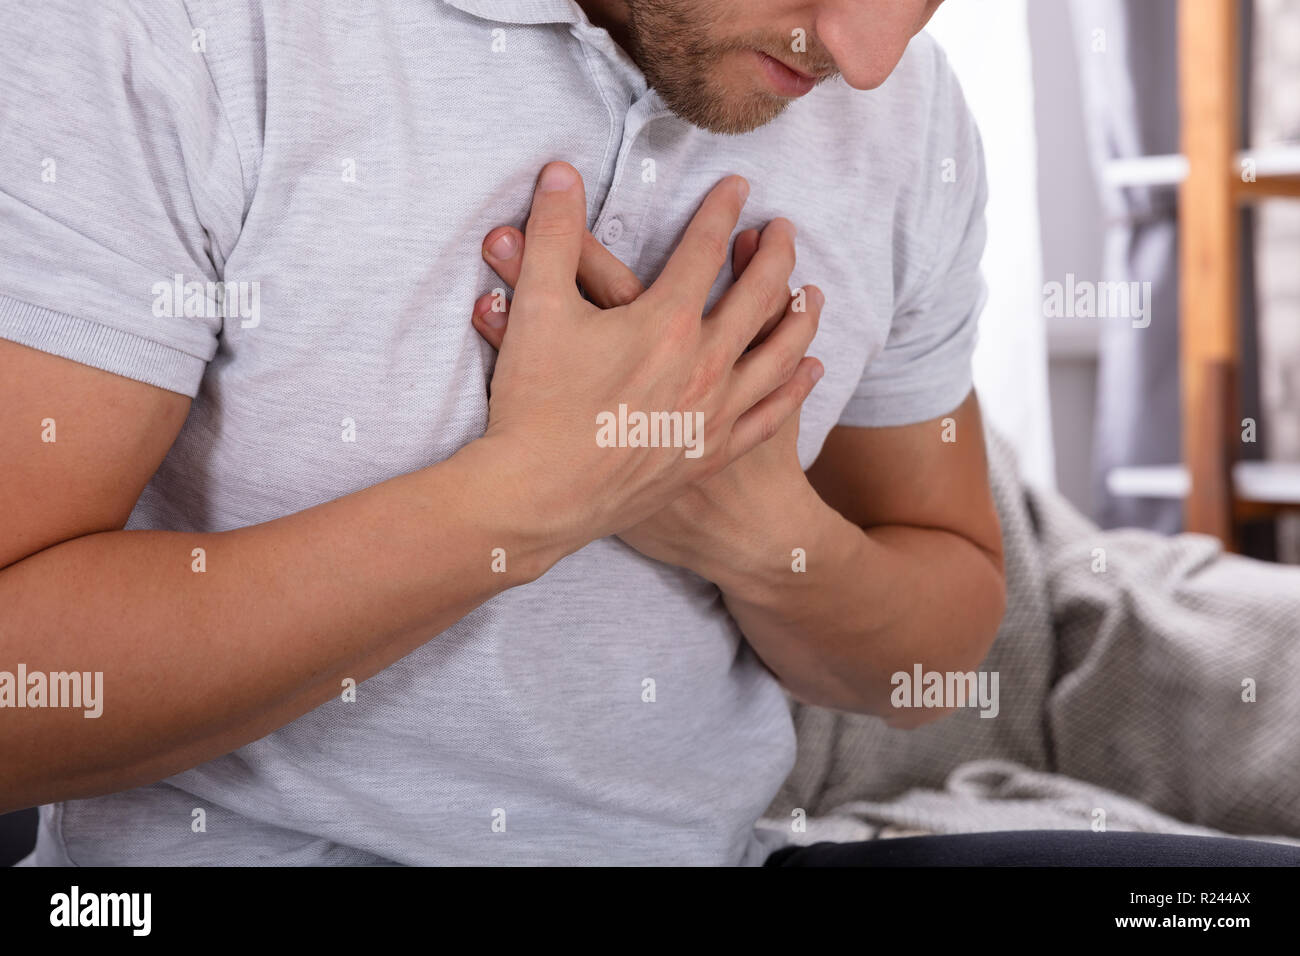 Man Touching His Chest While Suffering From Pain Stock Photo